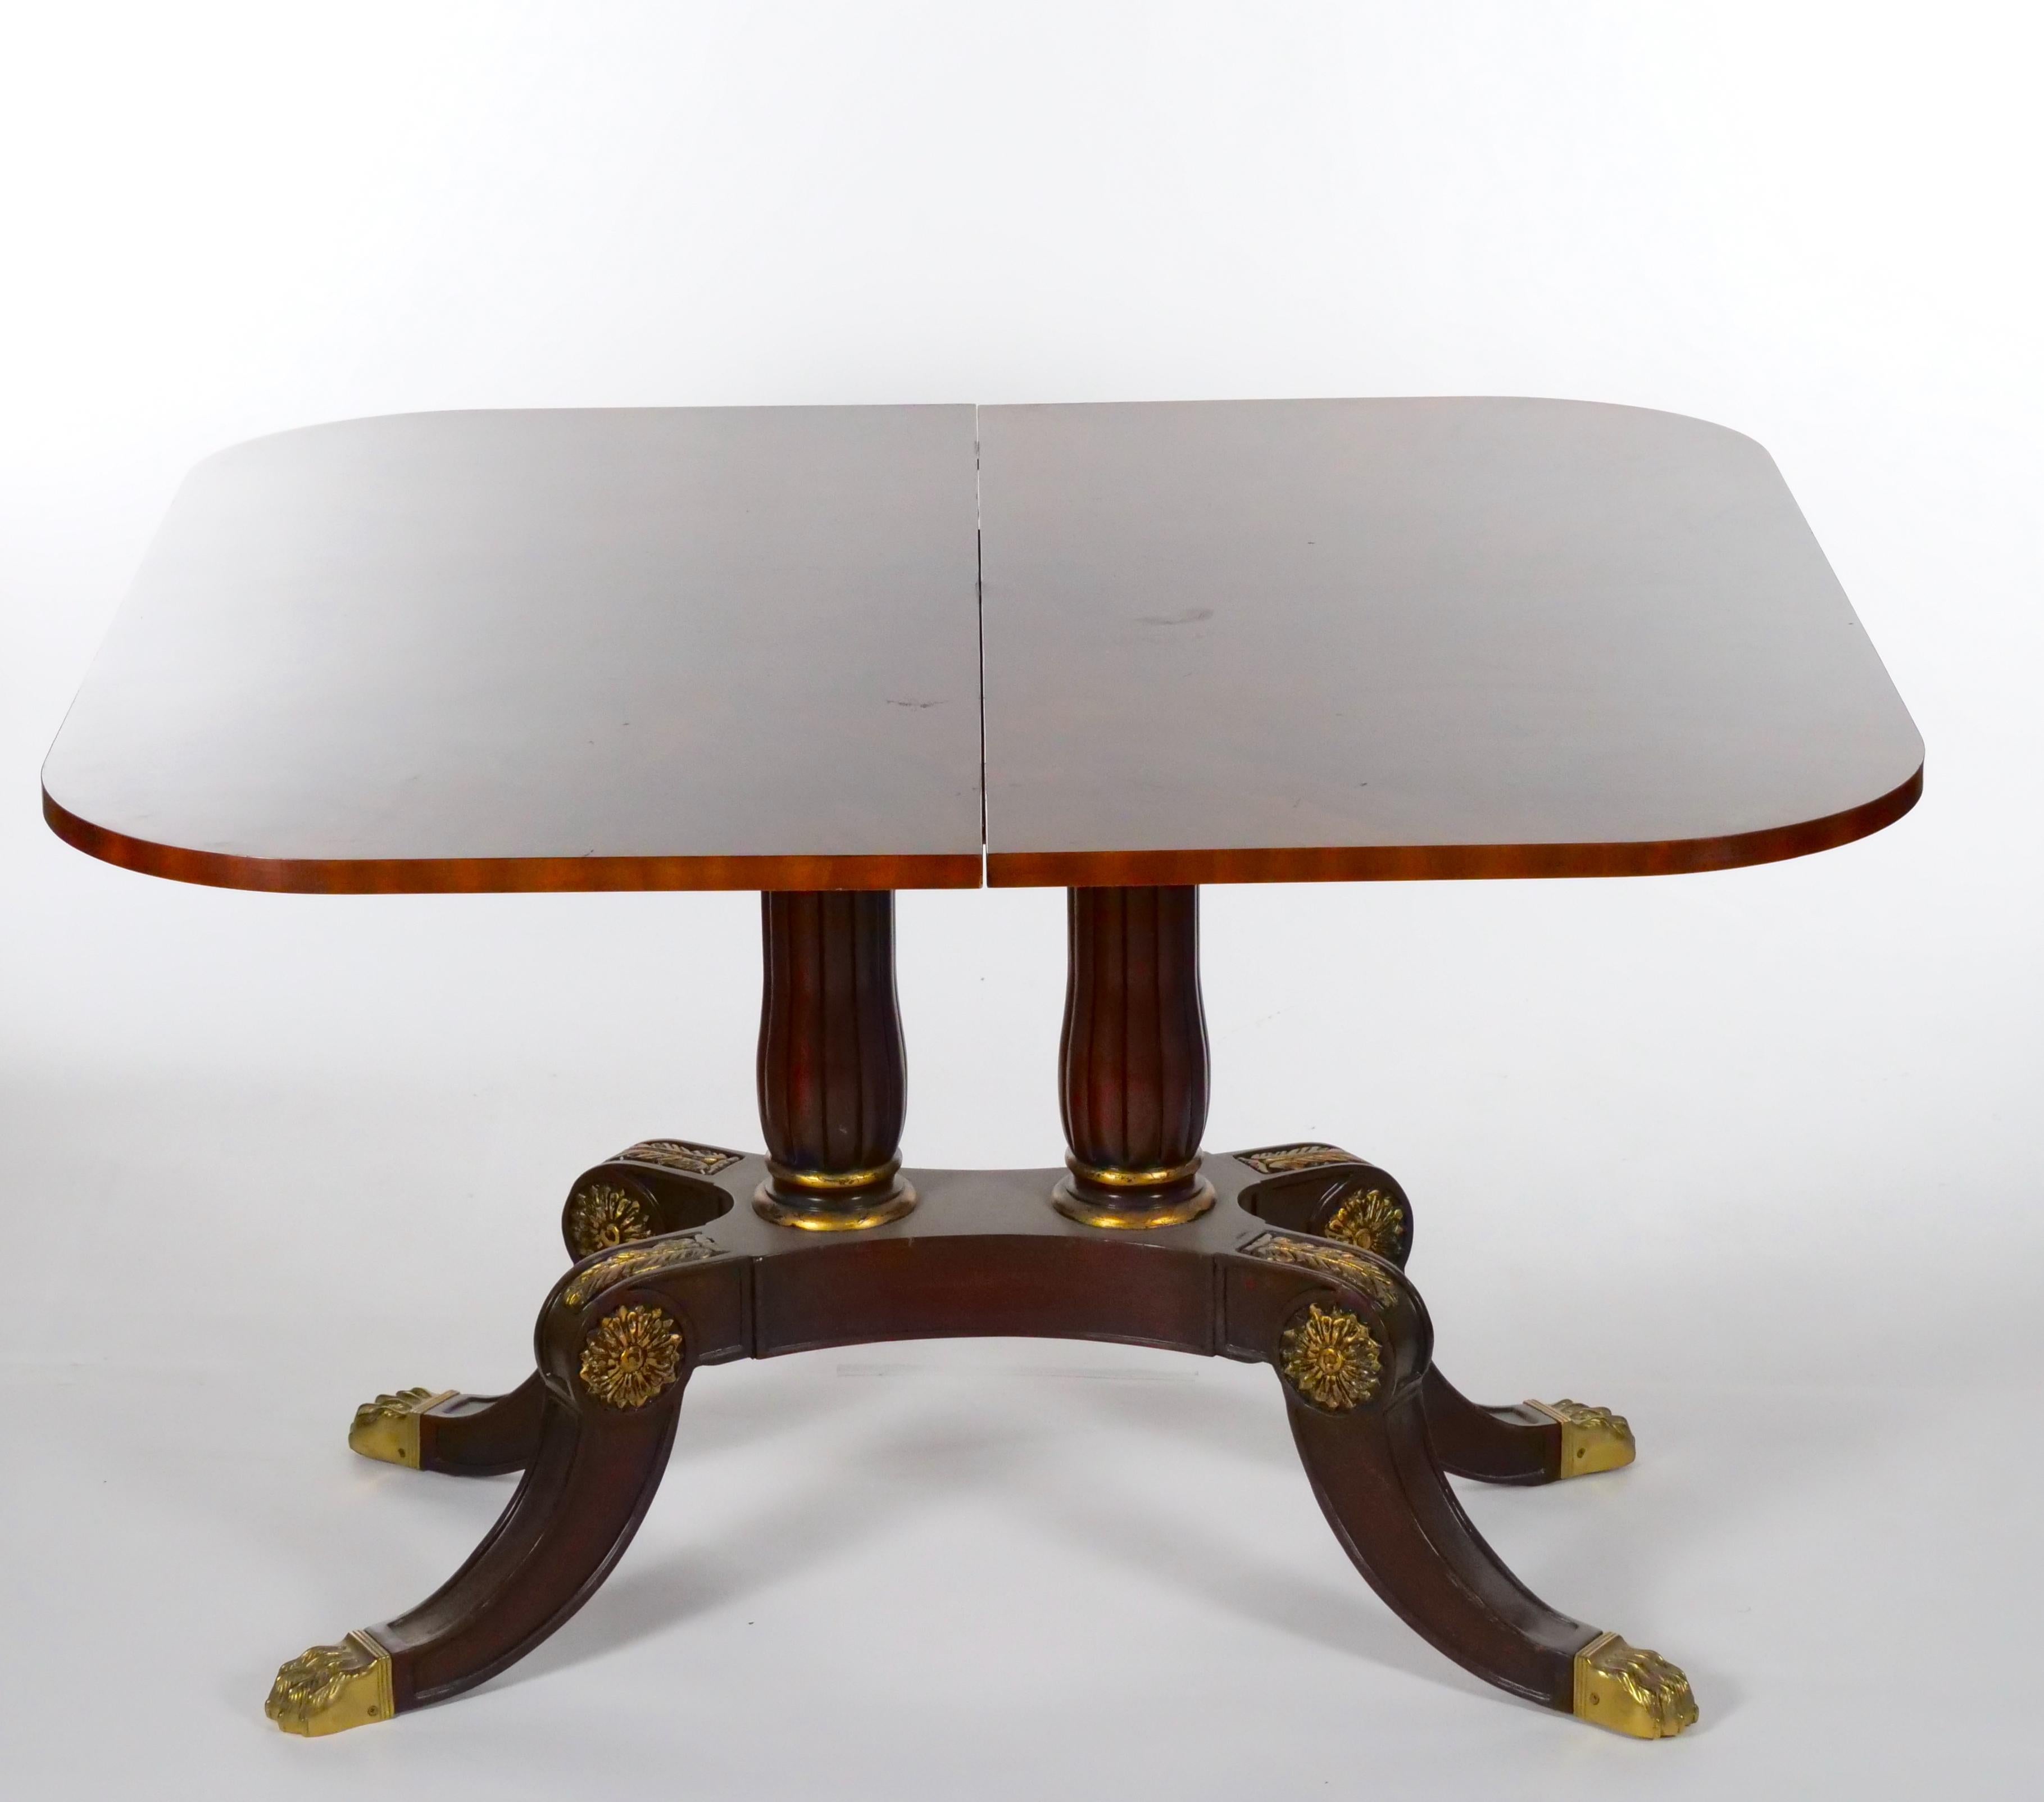 Beautiful Mid-20th Century mahogany wood oval shape neoclassical style small breakfast dining table with brass claw feet details. Close the table measures 28 inches high x 45 inches wide x 22 inches deep. When open the breakfast table can easily